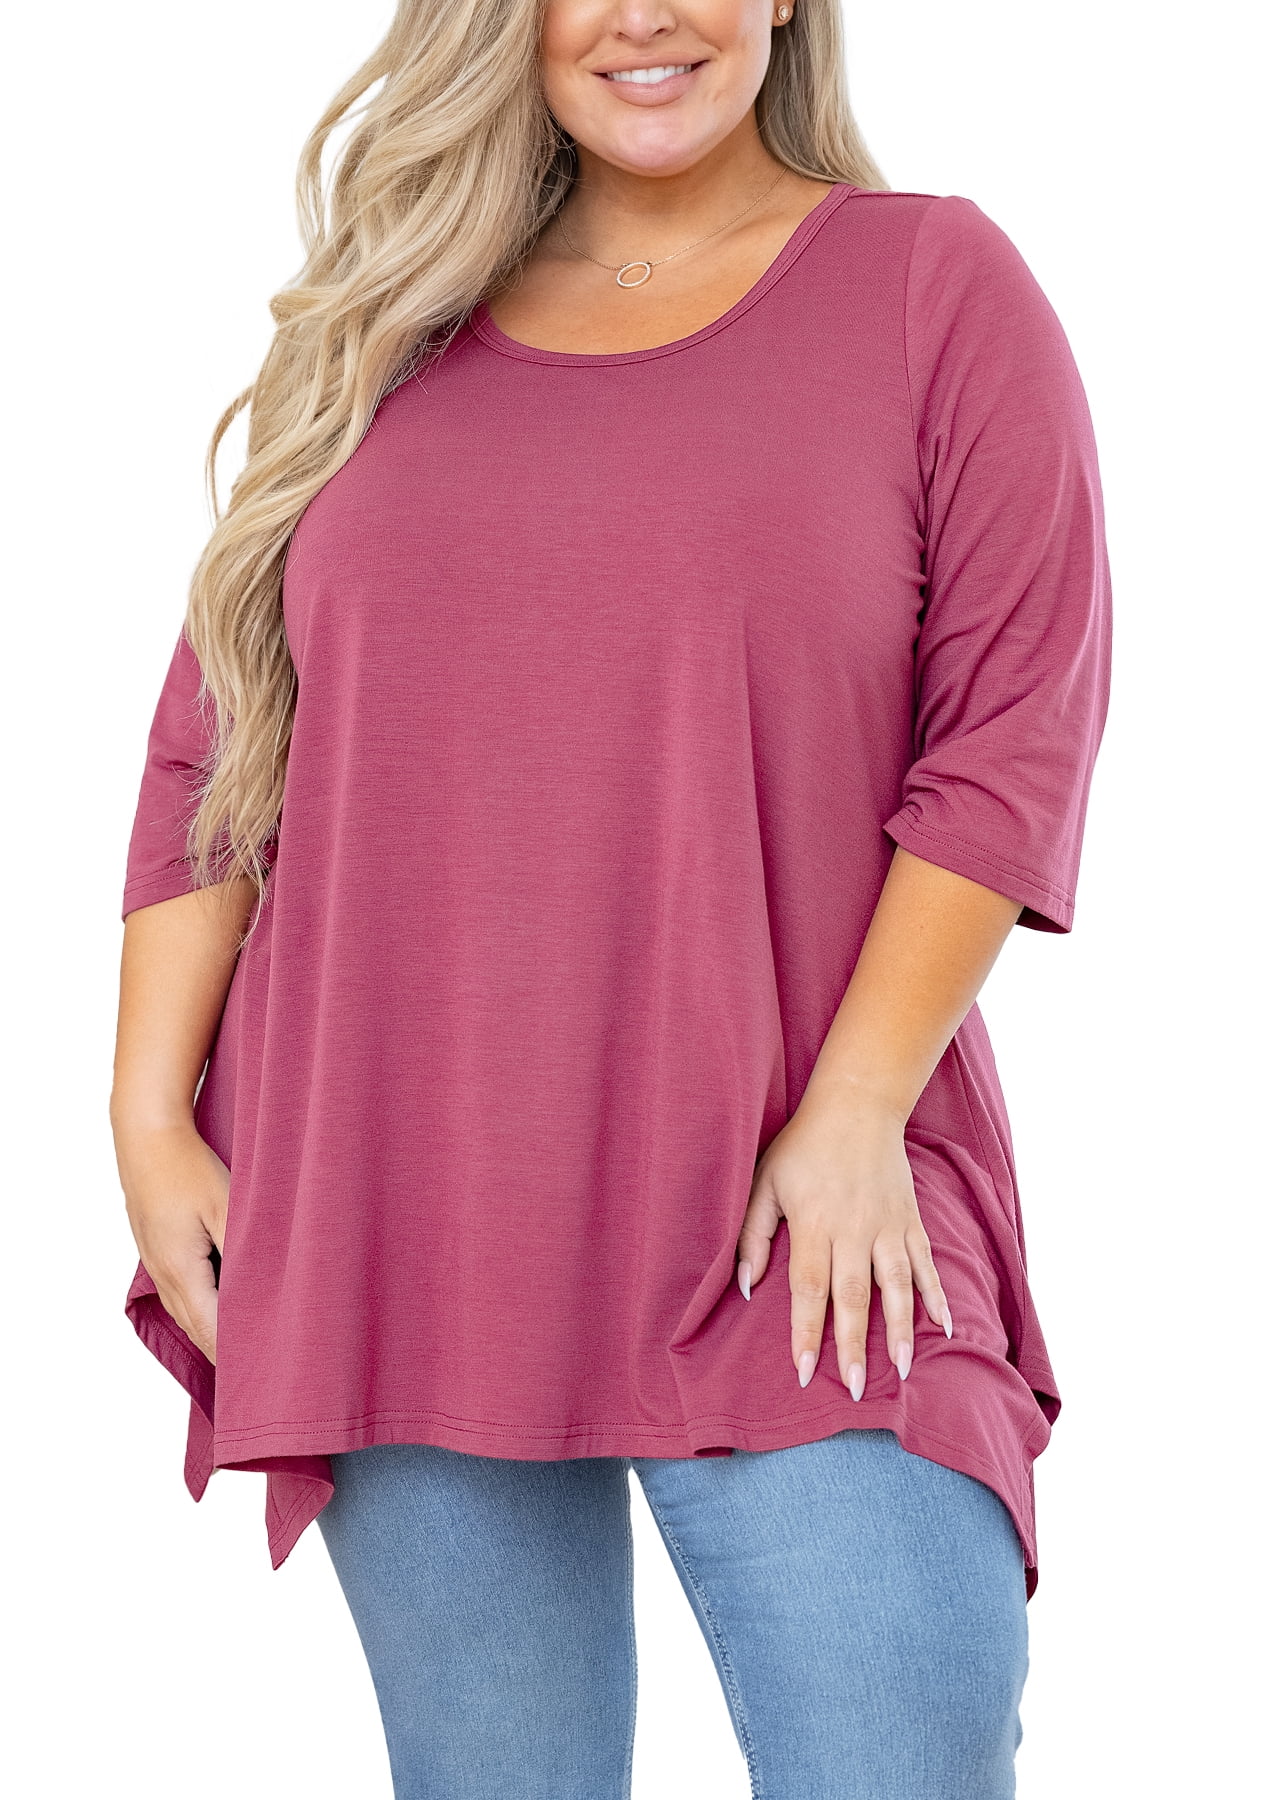 SHOWMALL Plus Size Women Top 3/4 Sleeve Clothes Purple Red 2X Blouse Swing  Tunic Crewneck Loose Clothing Shirt for Leggings 